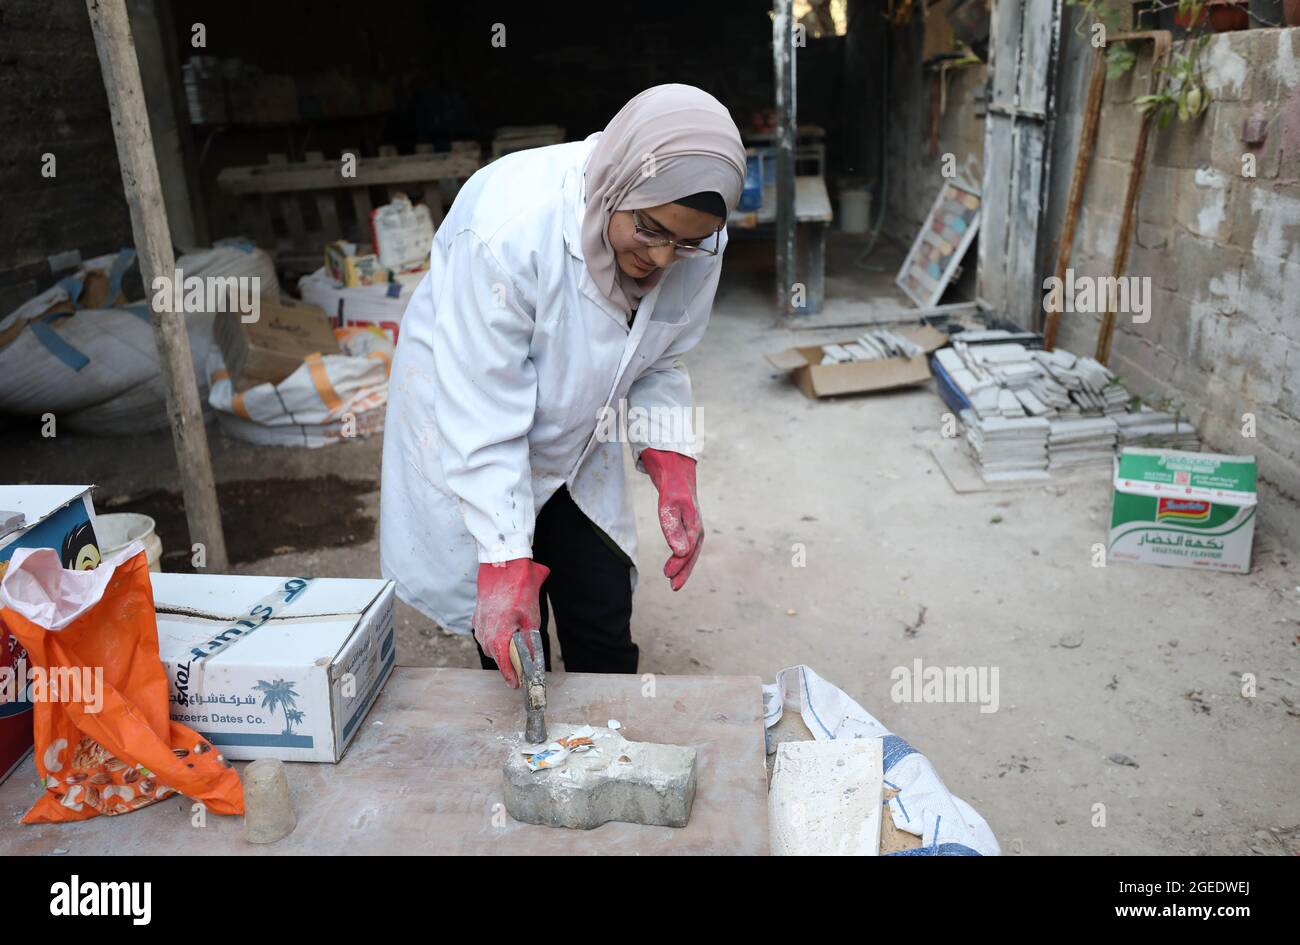 Tulkarem. 12th Aug, 2021. Rawan Rajab works on turning the waste of glass into eco-friendly building stones at her workshop in the West Bank City of Tulkarem, Aug. 12, 2021. TO GO WITH 'Feature: Young Palestinian woman turns glass waste into eco-friendly building stones' Credit: Ayman Nobani/Xinhua/Alamy Live News Stock Photo